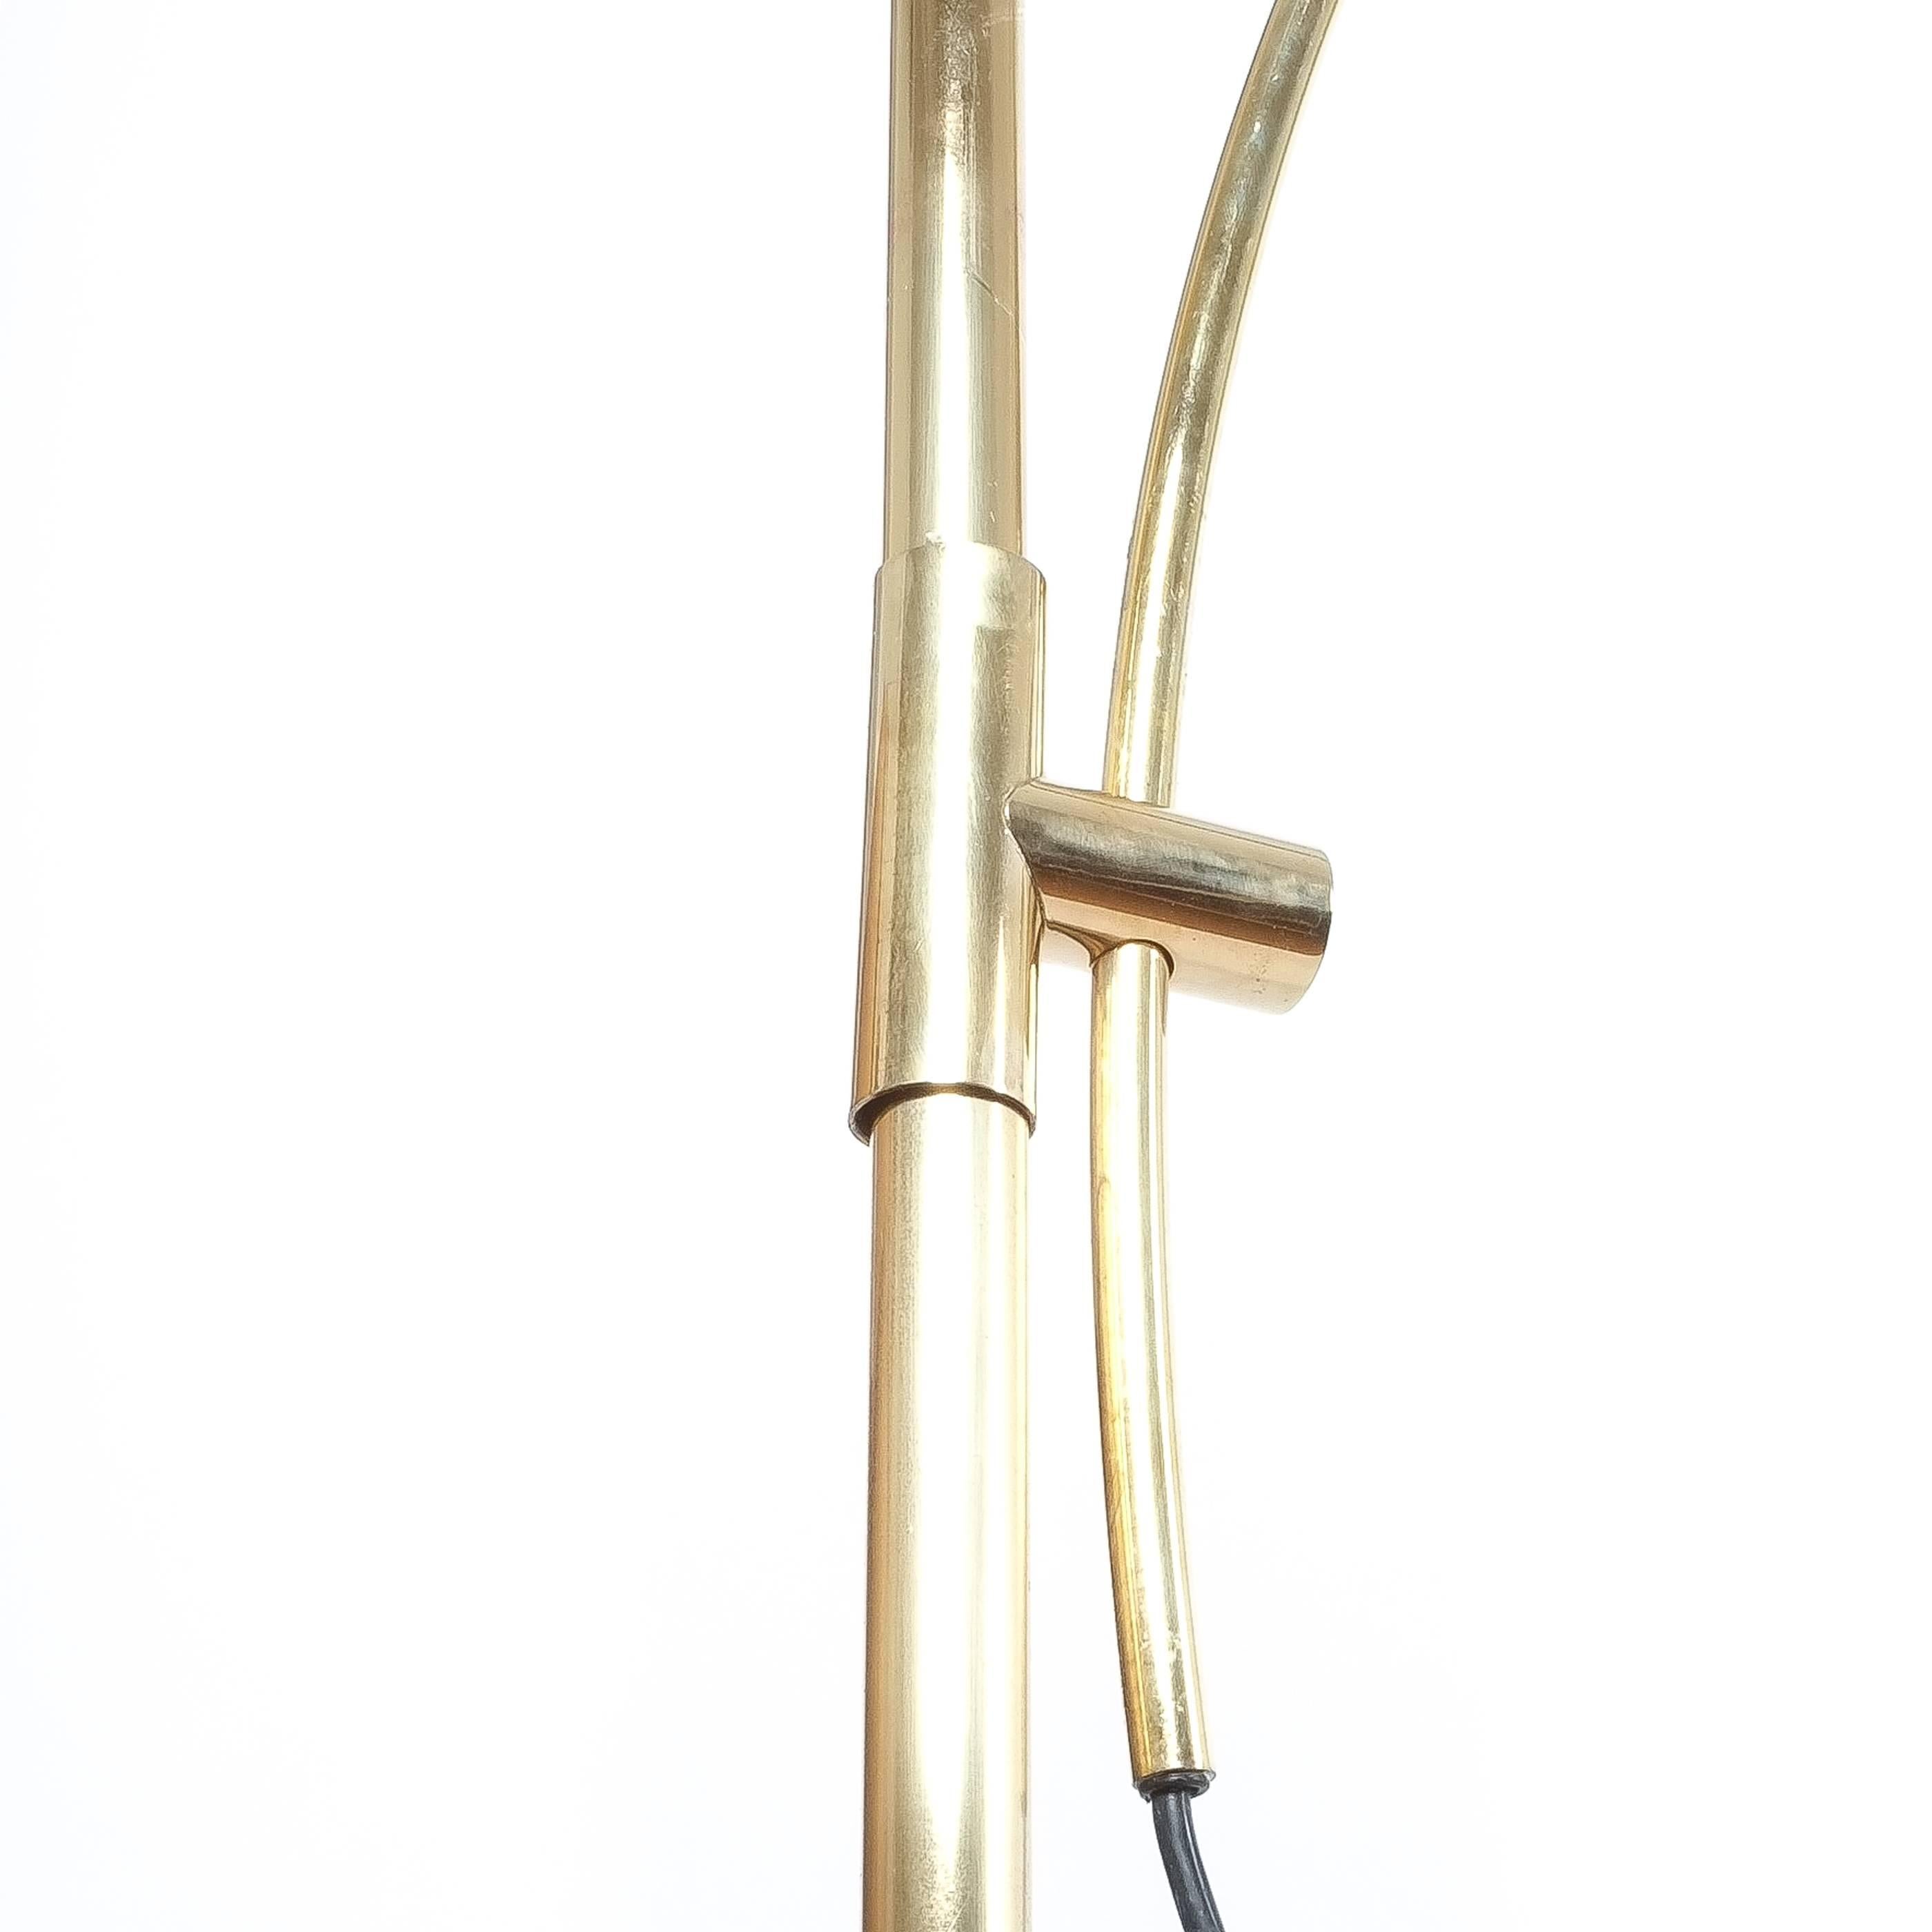 Late 20th Century Refurbished Brass Floor Lamp with Adjustable Arc by Florian Schulz, 1970